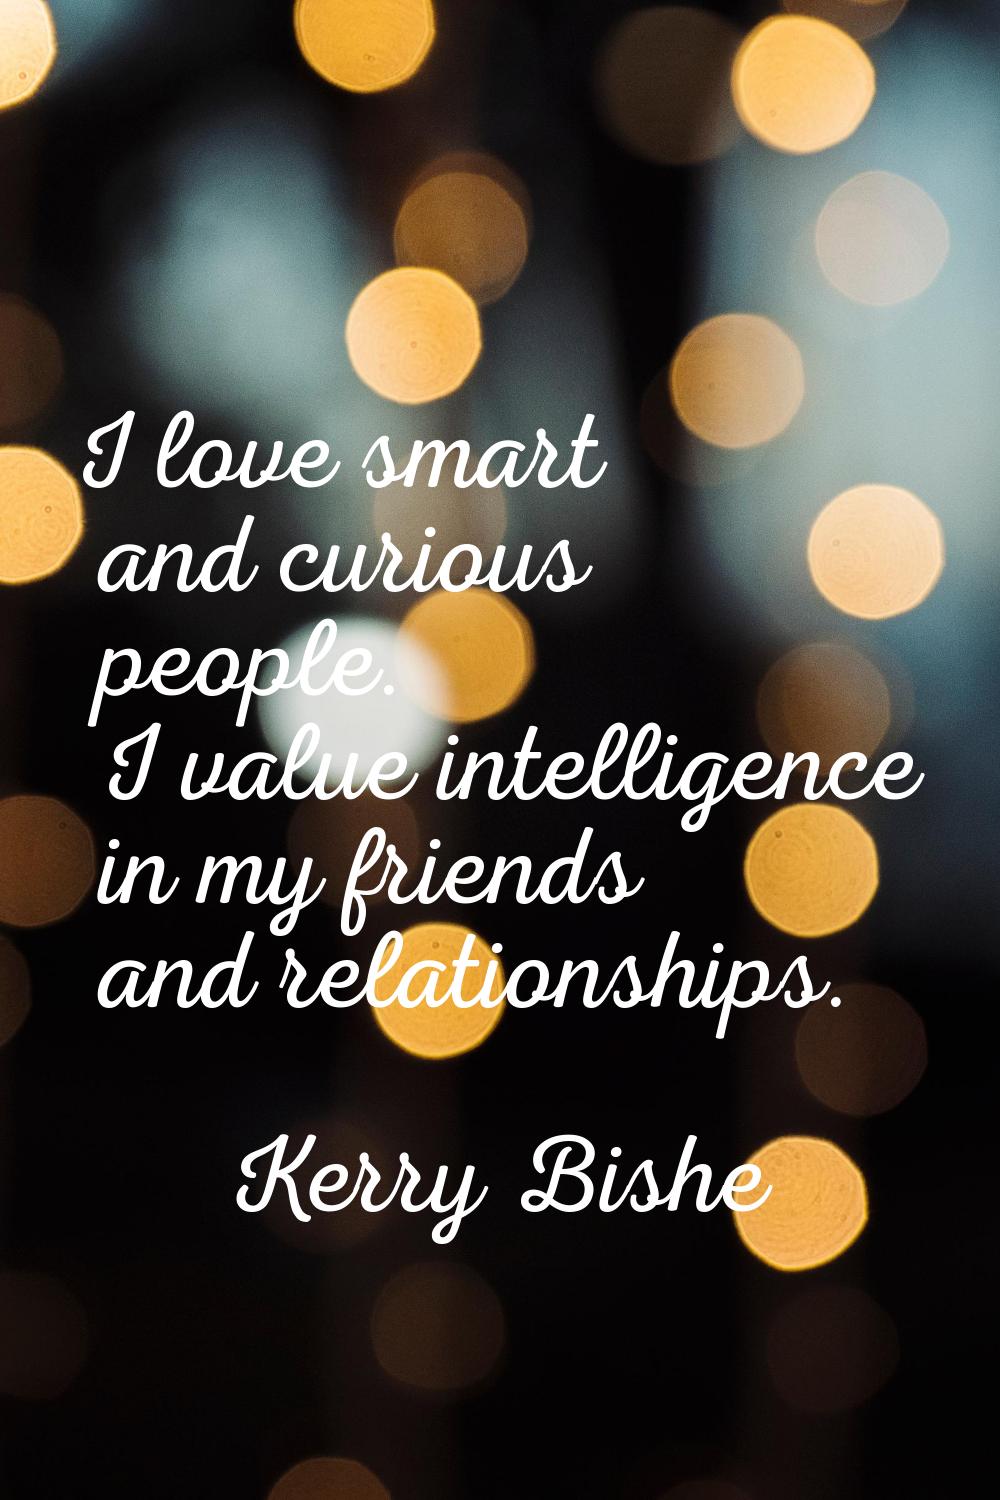 I love smart and curious people. I value intelligence in my friends and relationships.